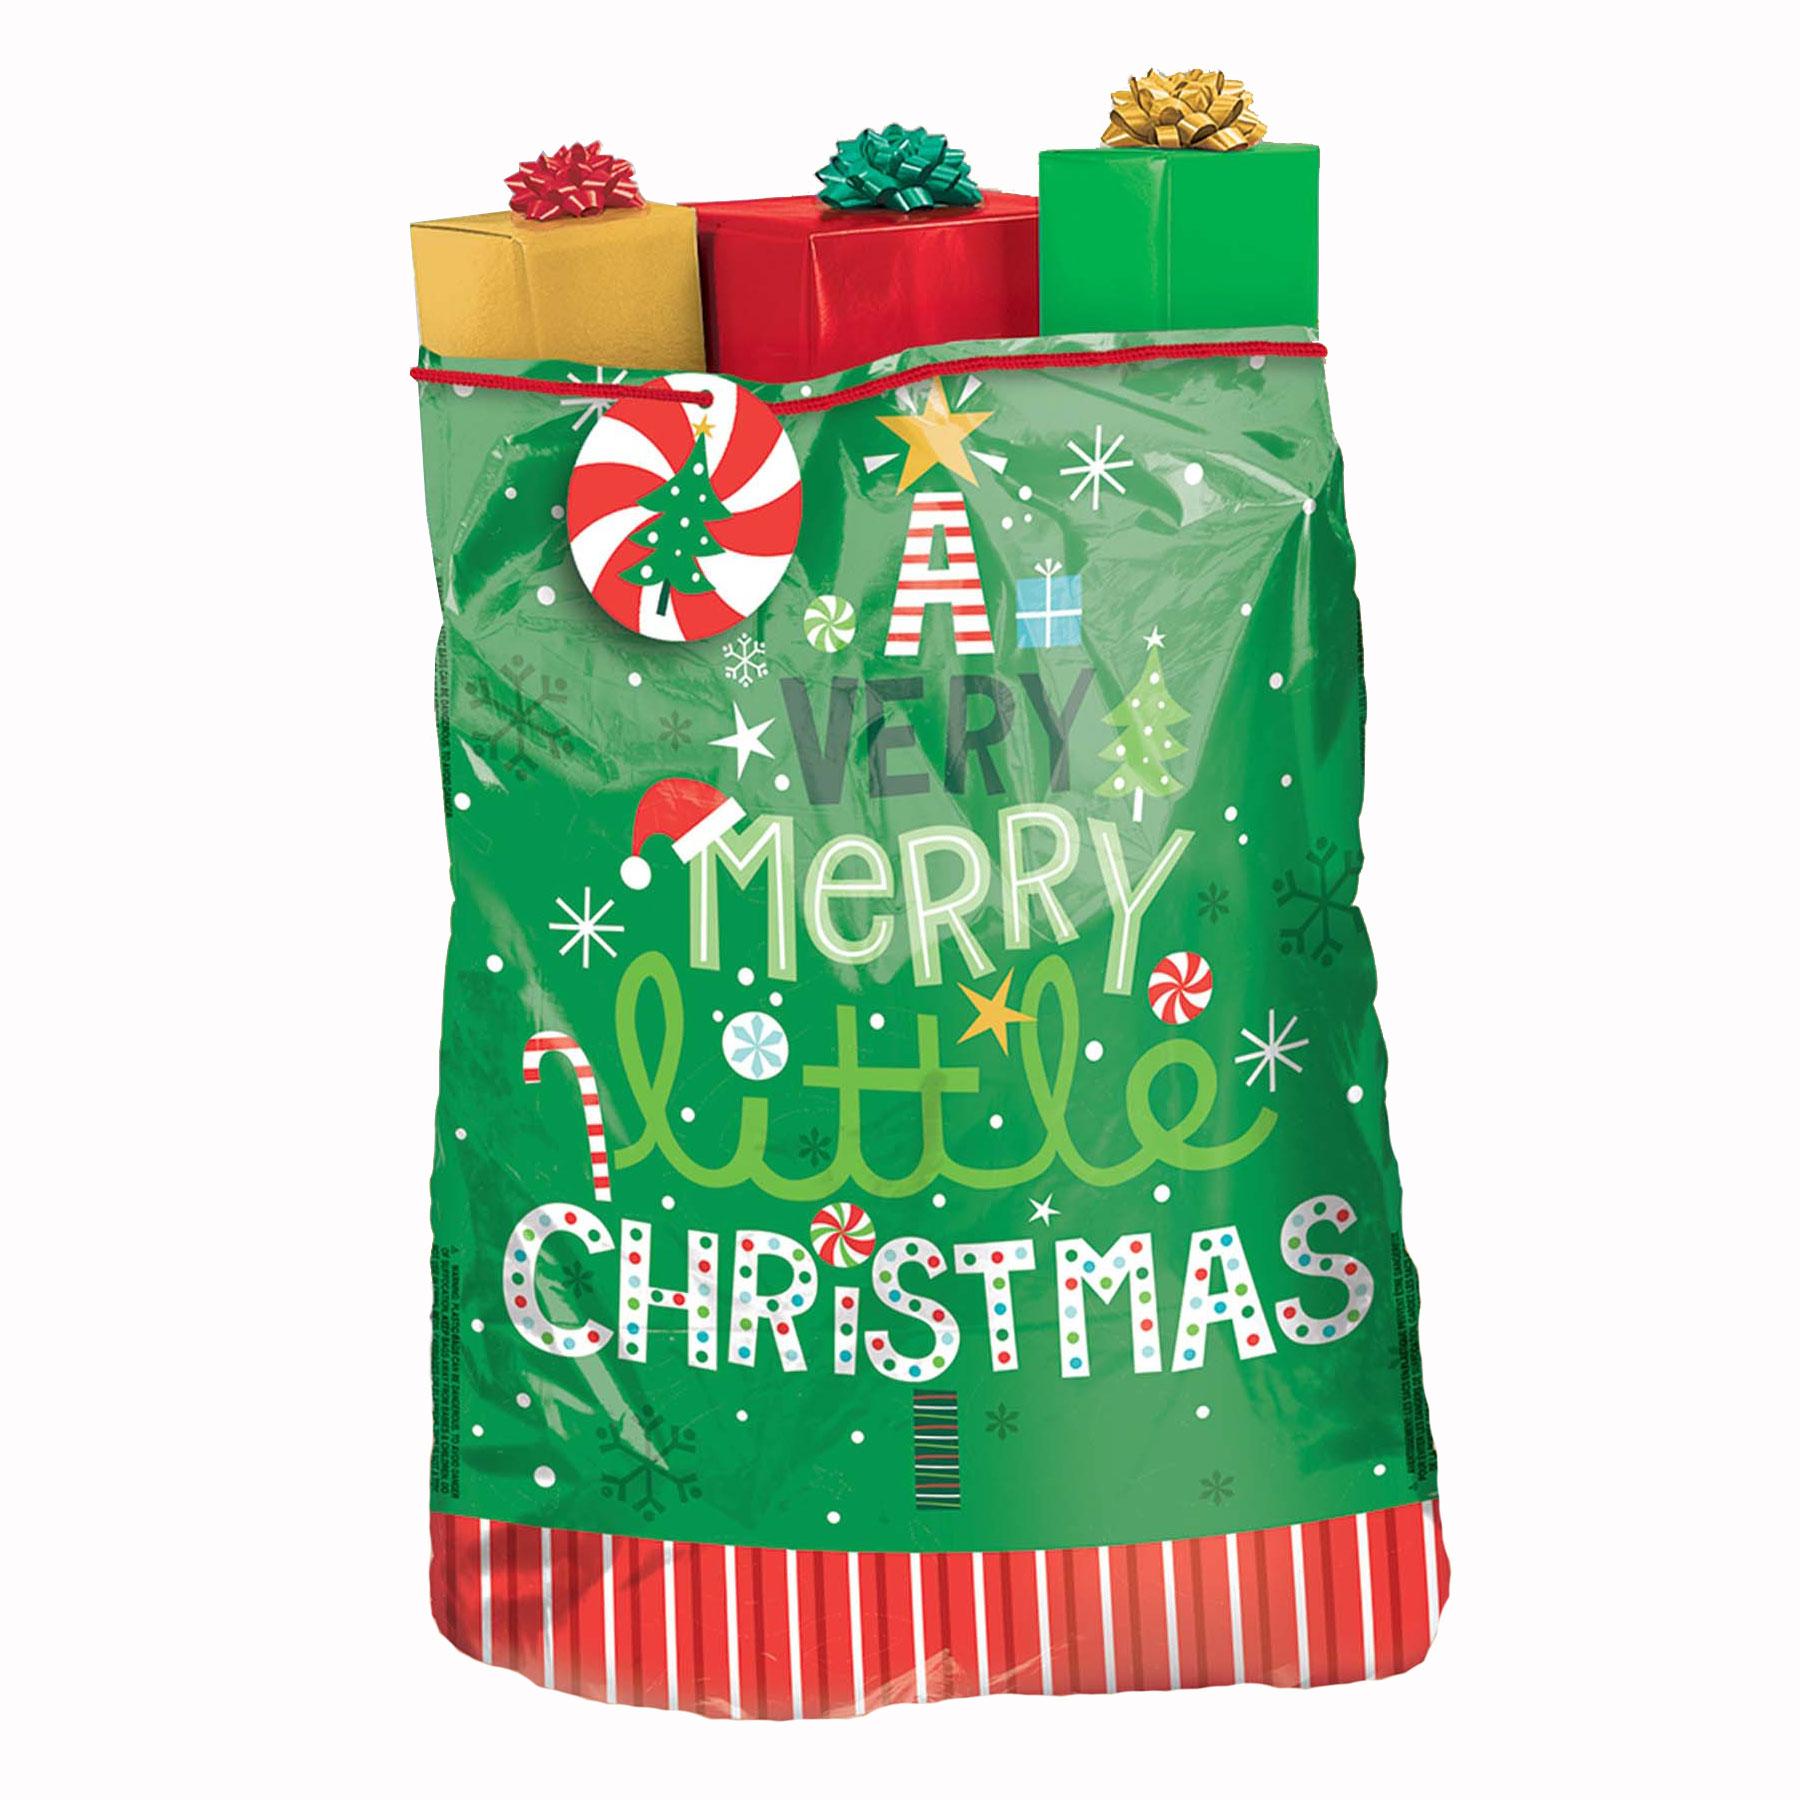 Very Merry Plastic Super Giant Gift Sack Favours - Party Centre